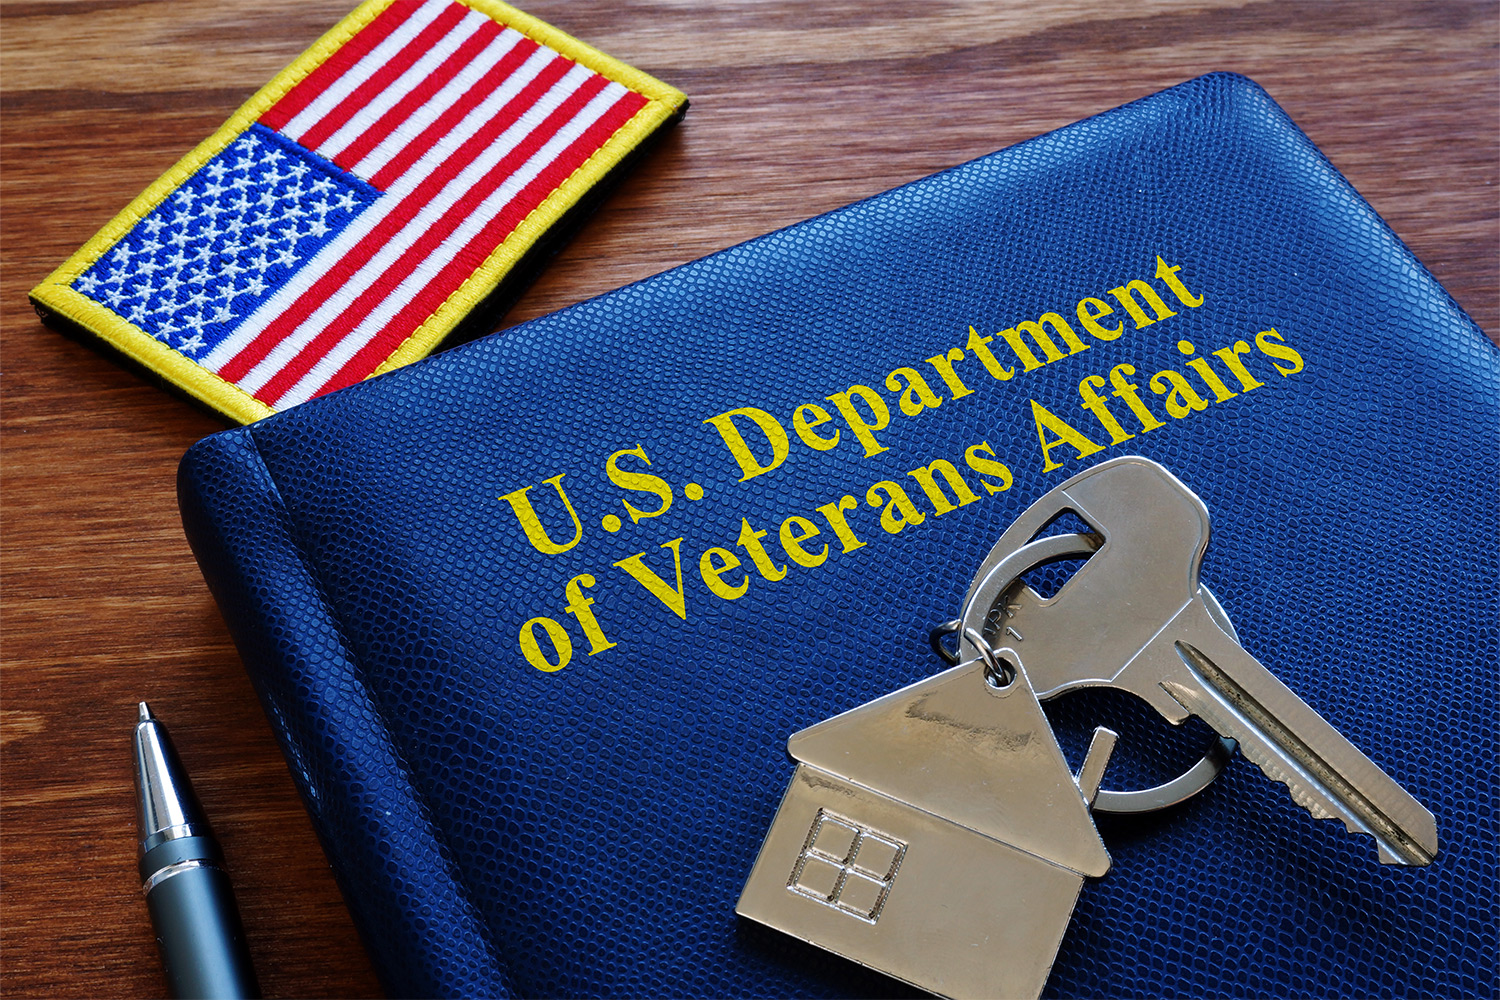 VBMS: The Veterans Benefits Management System Guide